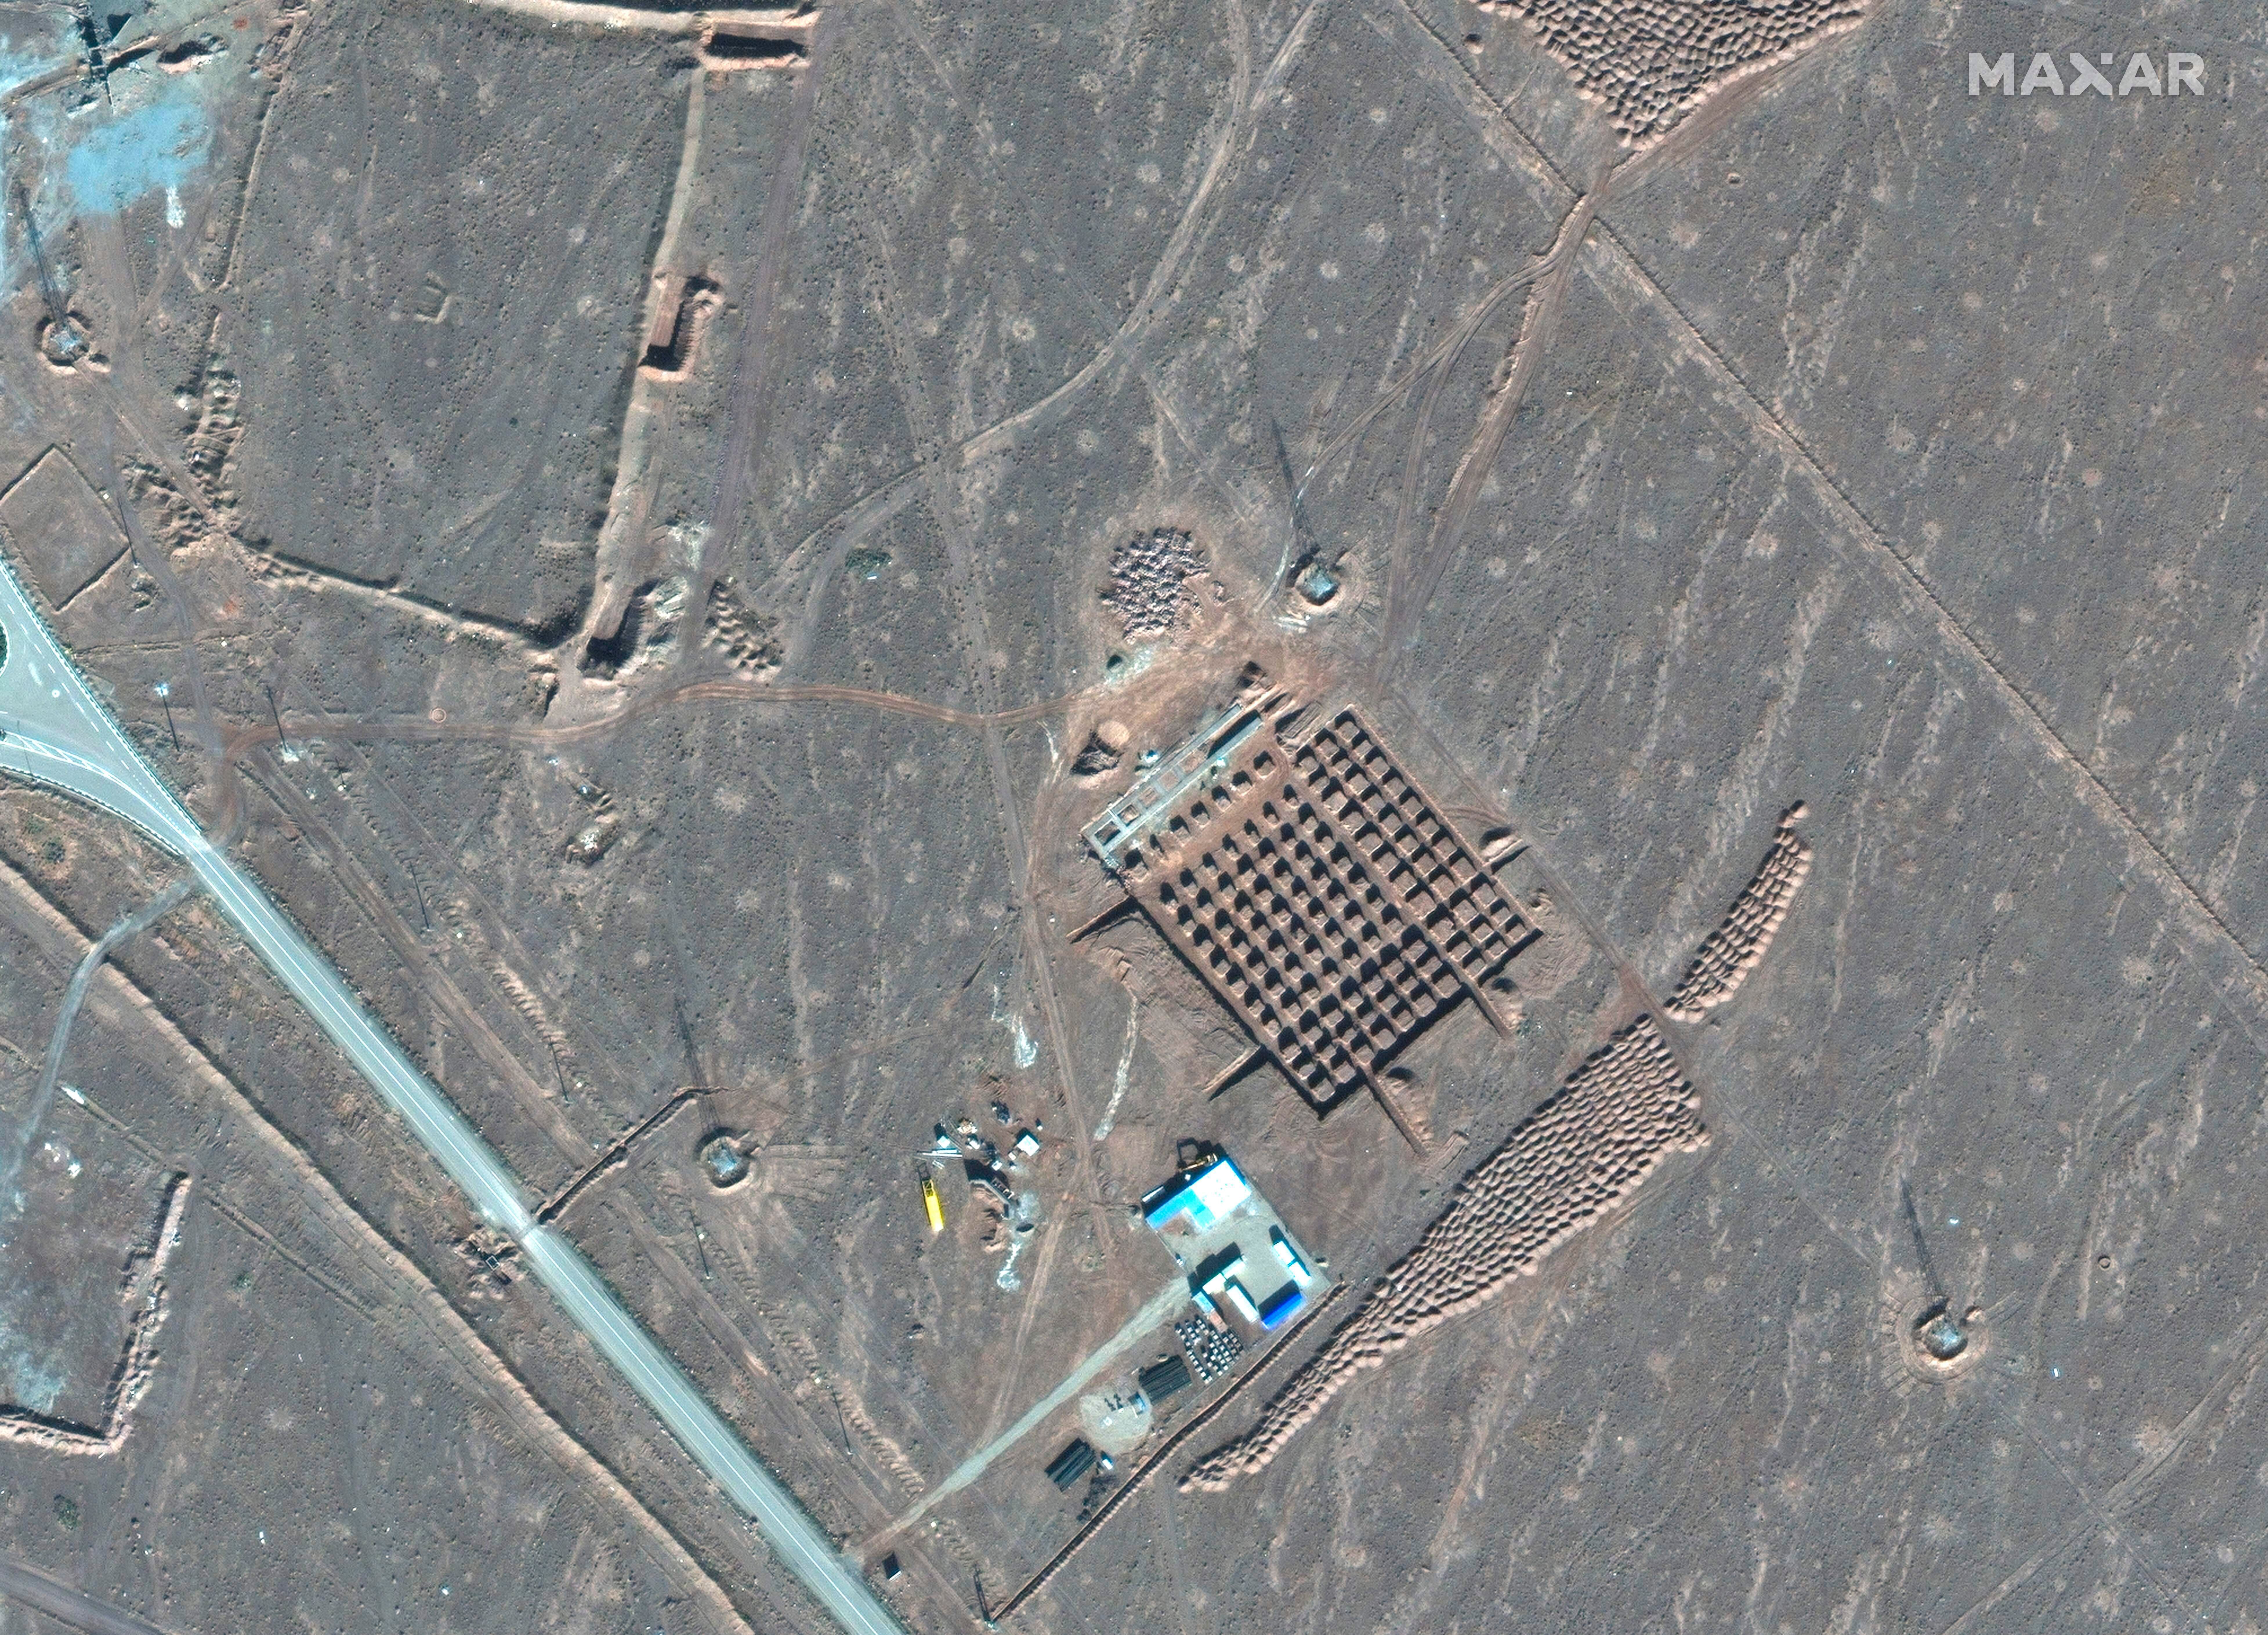 This Dec. 11, 2020, satellite photo by Maxar Technologies shows construction at Iran's Fordo nuclear facility. Iran has begun